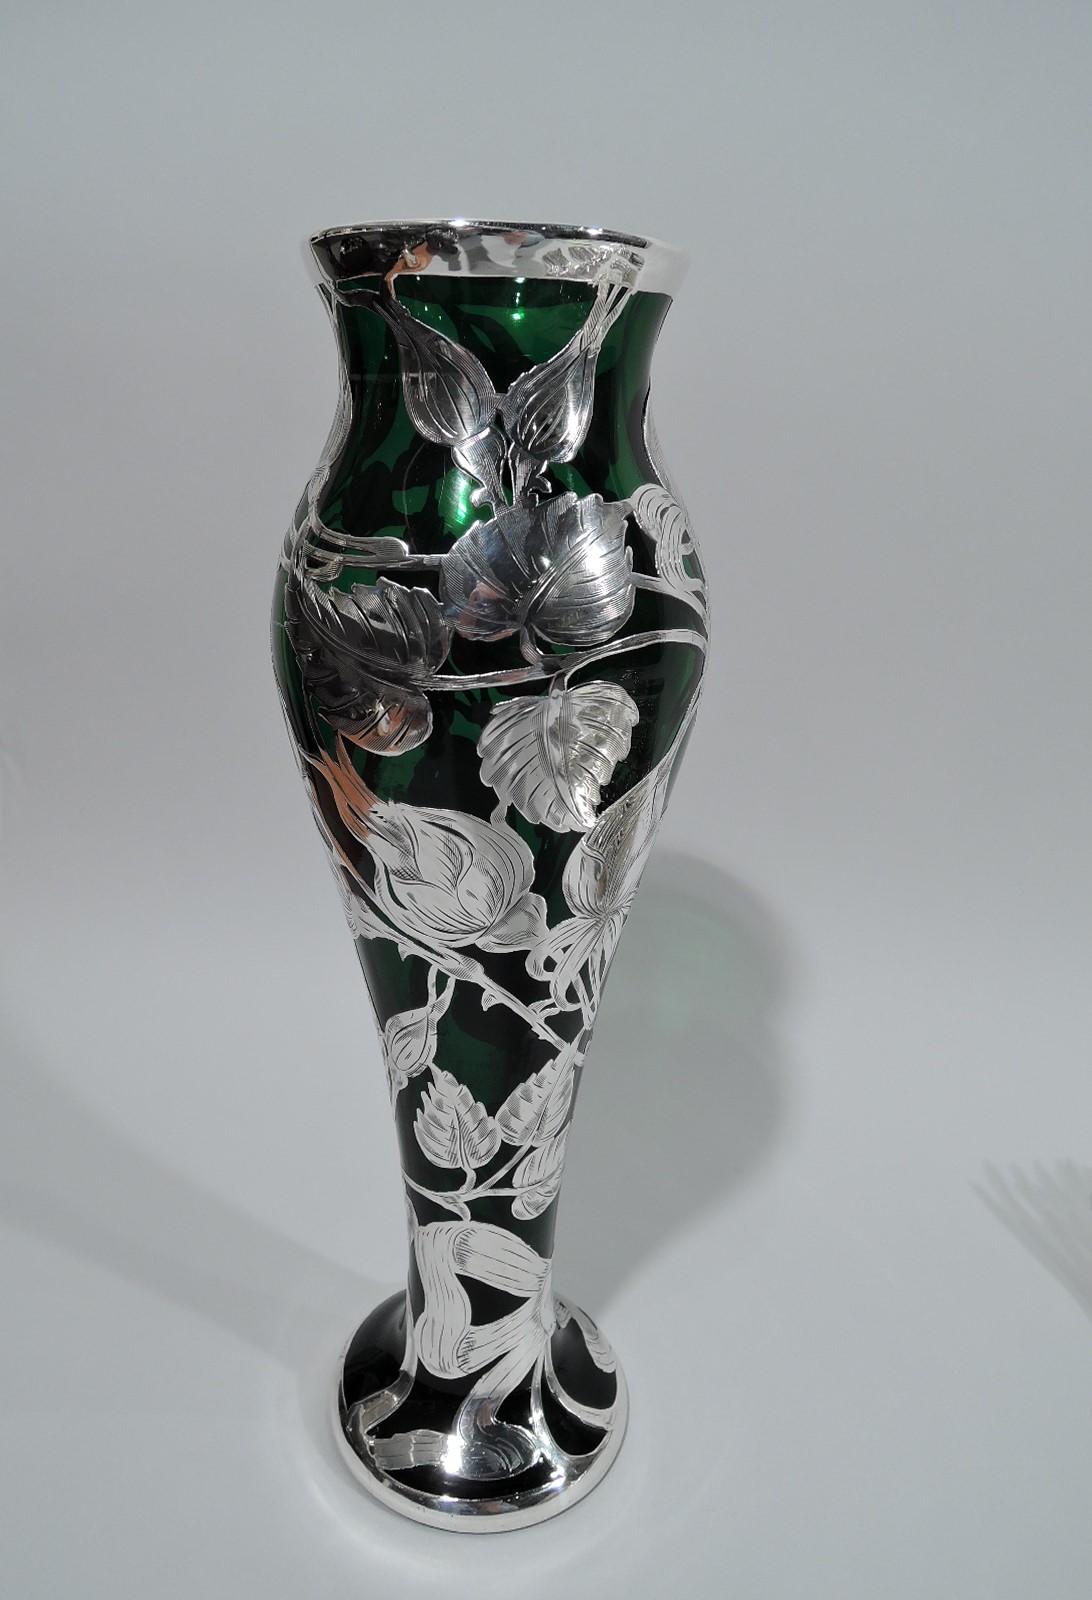 Turn-of-the-century Art Nouveau glass vase with engraved silver overlay. Ovoid body flowing into spread foot. Overlay in form of rose branch with buds and blooms on floaty, leafing tendrils. Ribbon cartouche engraved with interlaced 3-letter